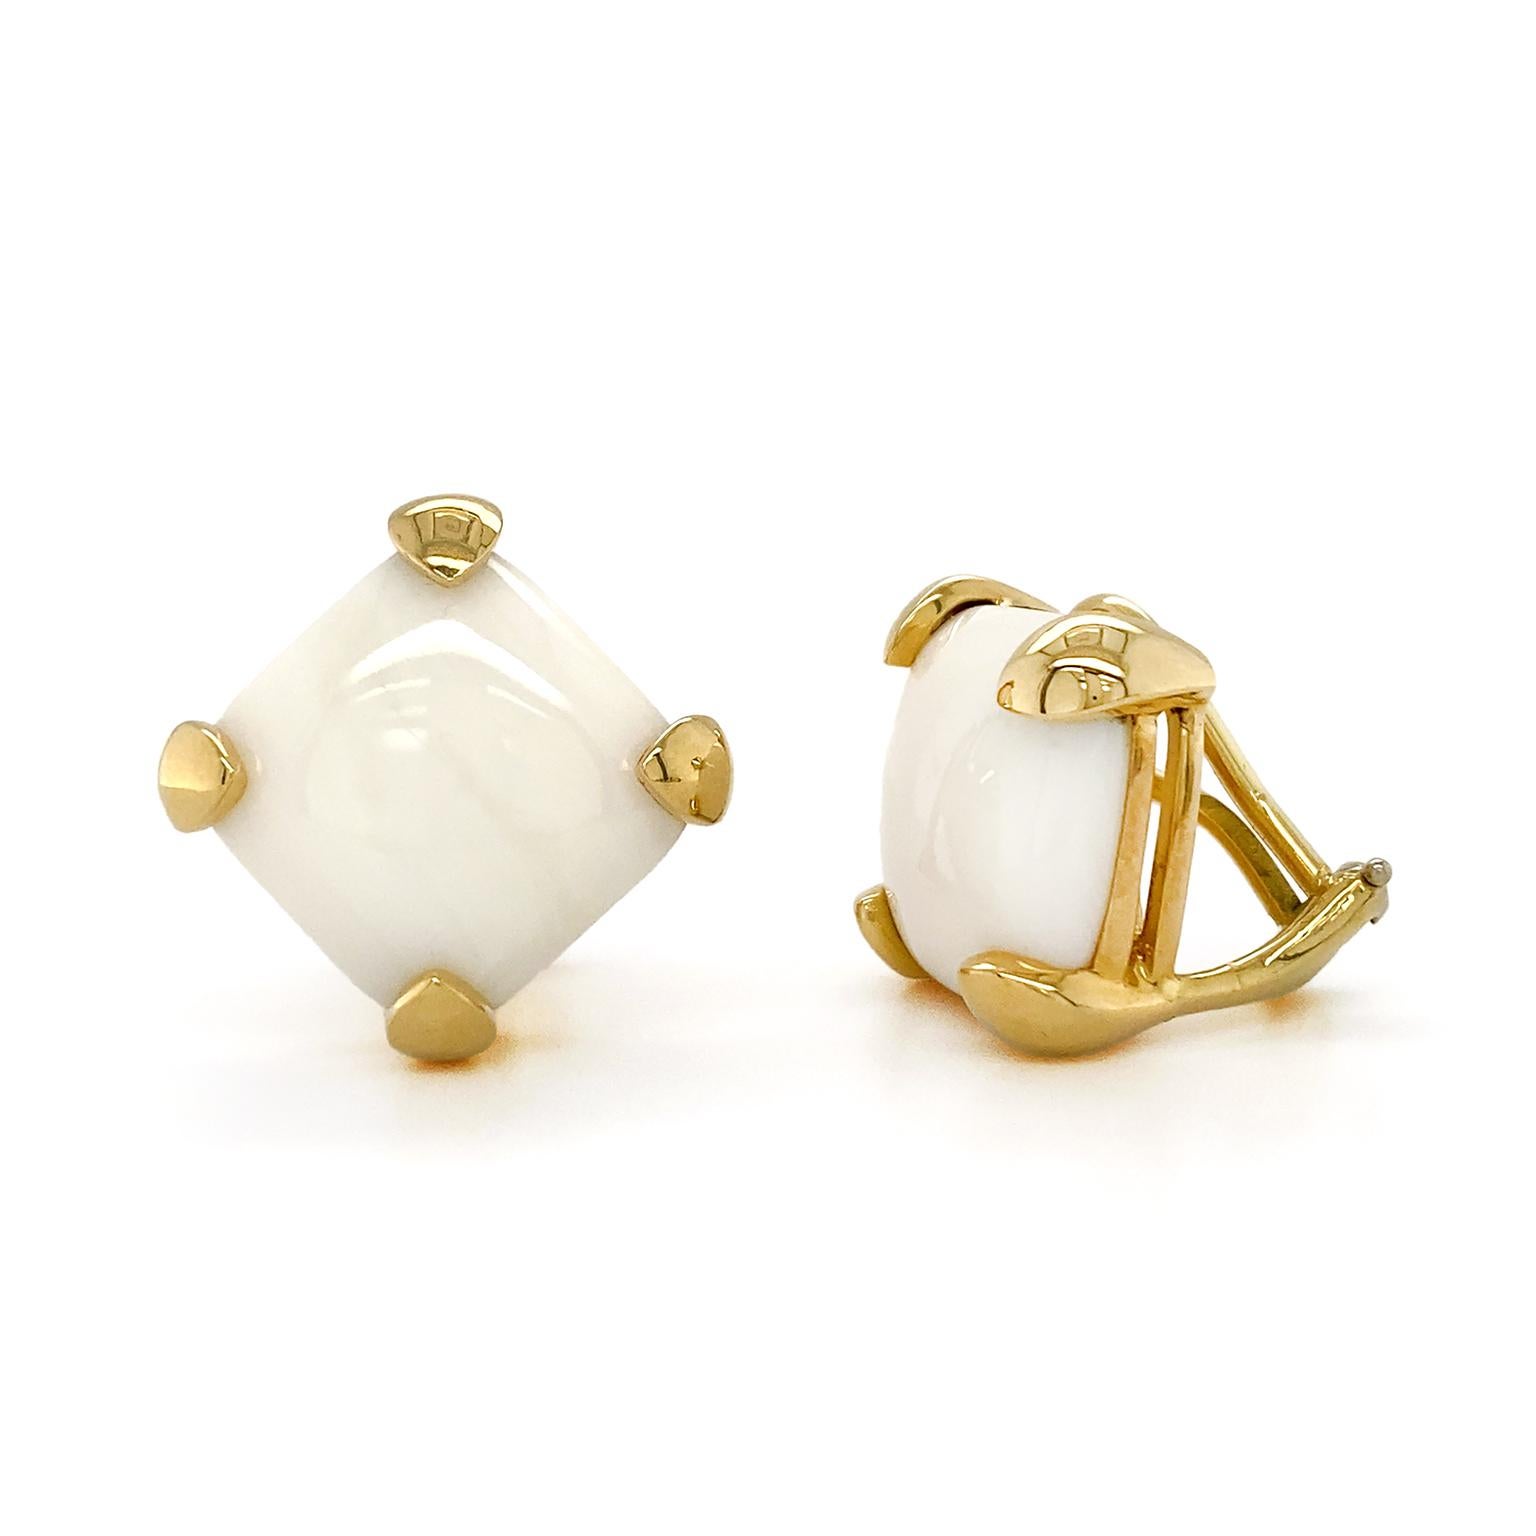 Jewels from the sea star in these earrings. The gem of choice is white coral, carved into cushion shaped cabochons. Subtle mottling plays across their surfaces. The coral is set rhombus wise with 18k yellow gold prongs hugging each corner. The